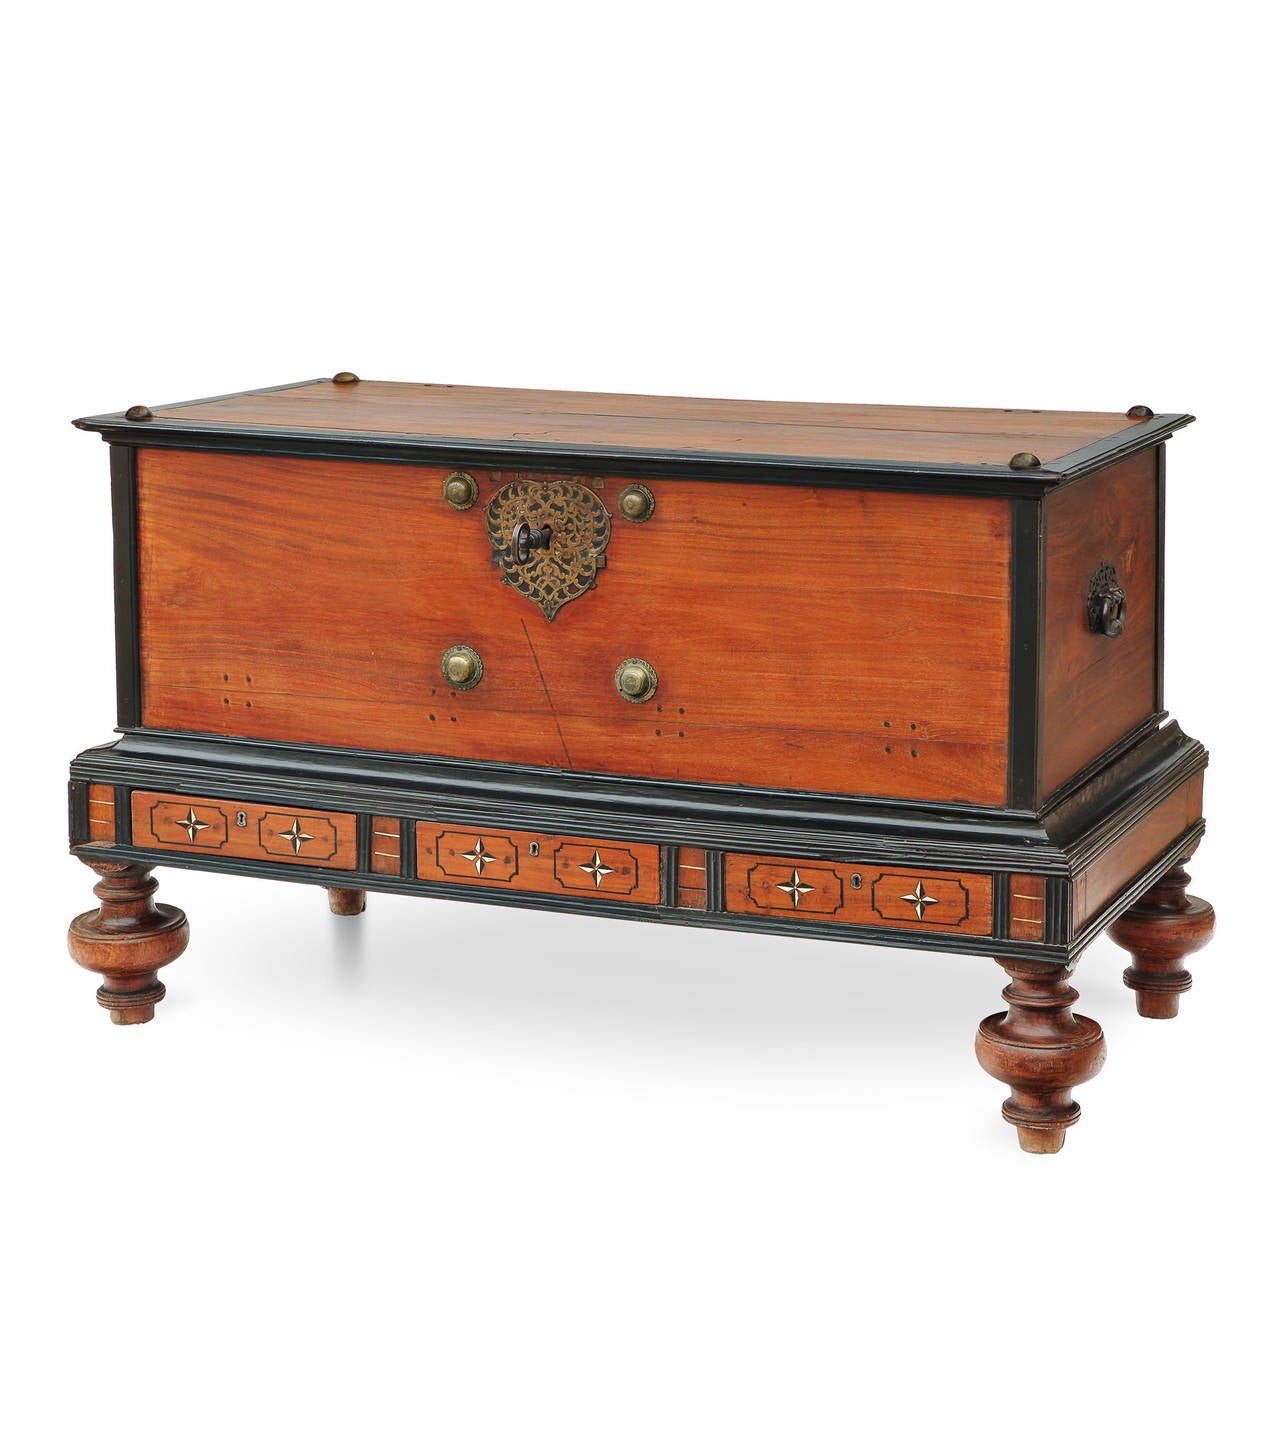 This piece tells a story: an antique chest that combines the Portuguese colonial style and the indian art. With precious brassy inserts, the bronze key that opens the lock is original and operated. Use as a traveling trunk on long journeys by ship